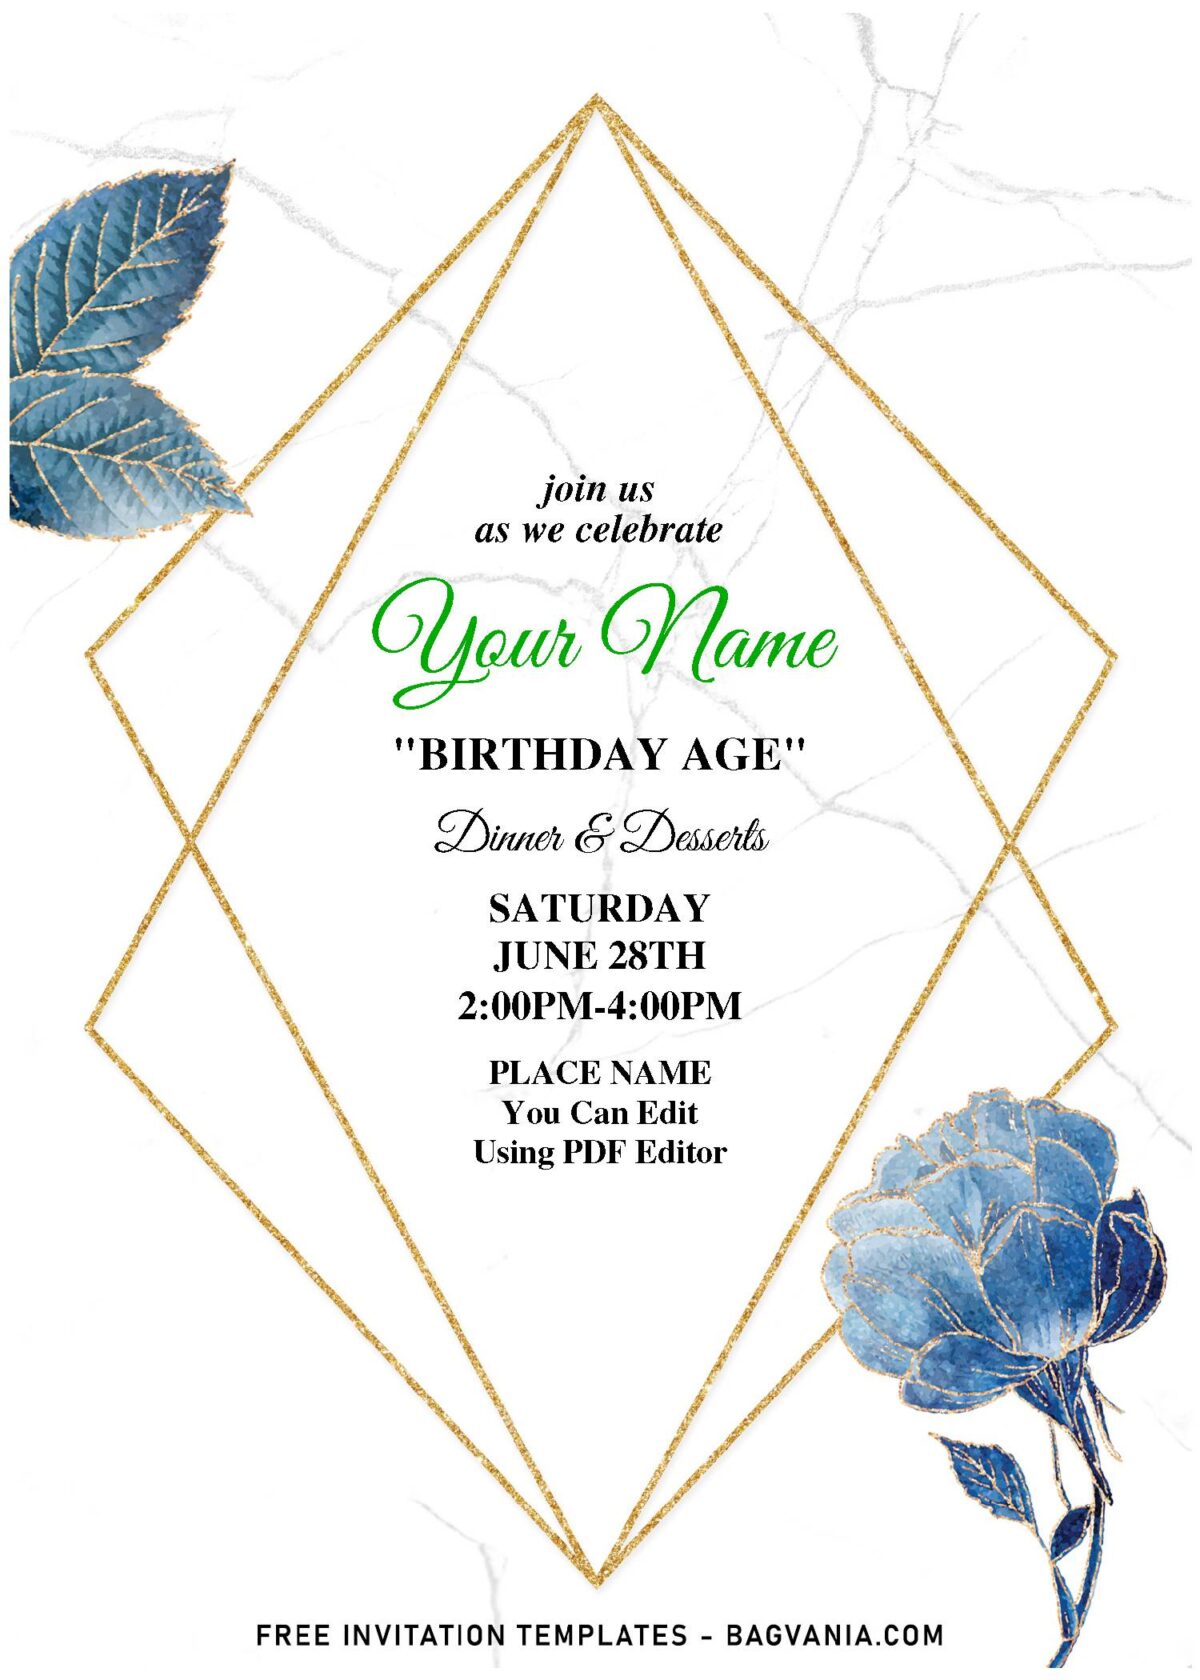 (Free Editable PDF) Stunning Blue And Gold Flowers Birthday Invitation Templates with gold geometric frame